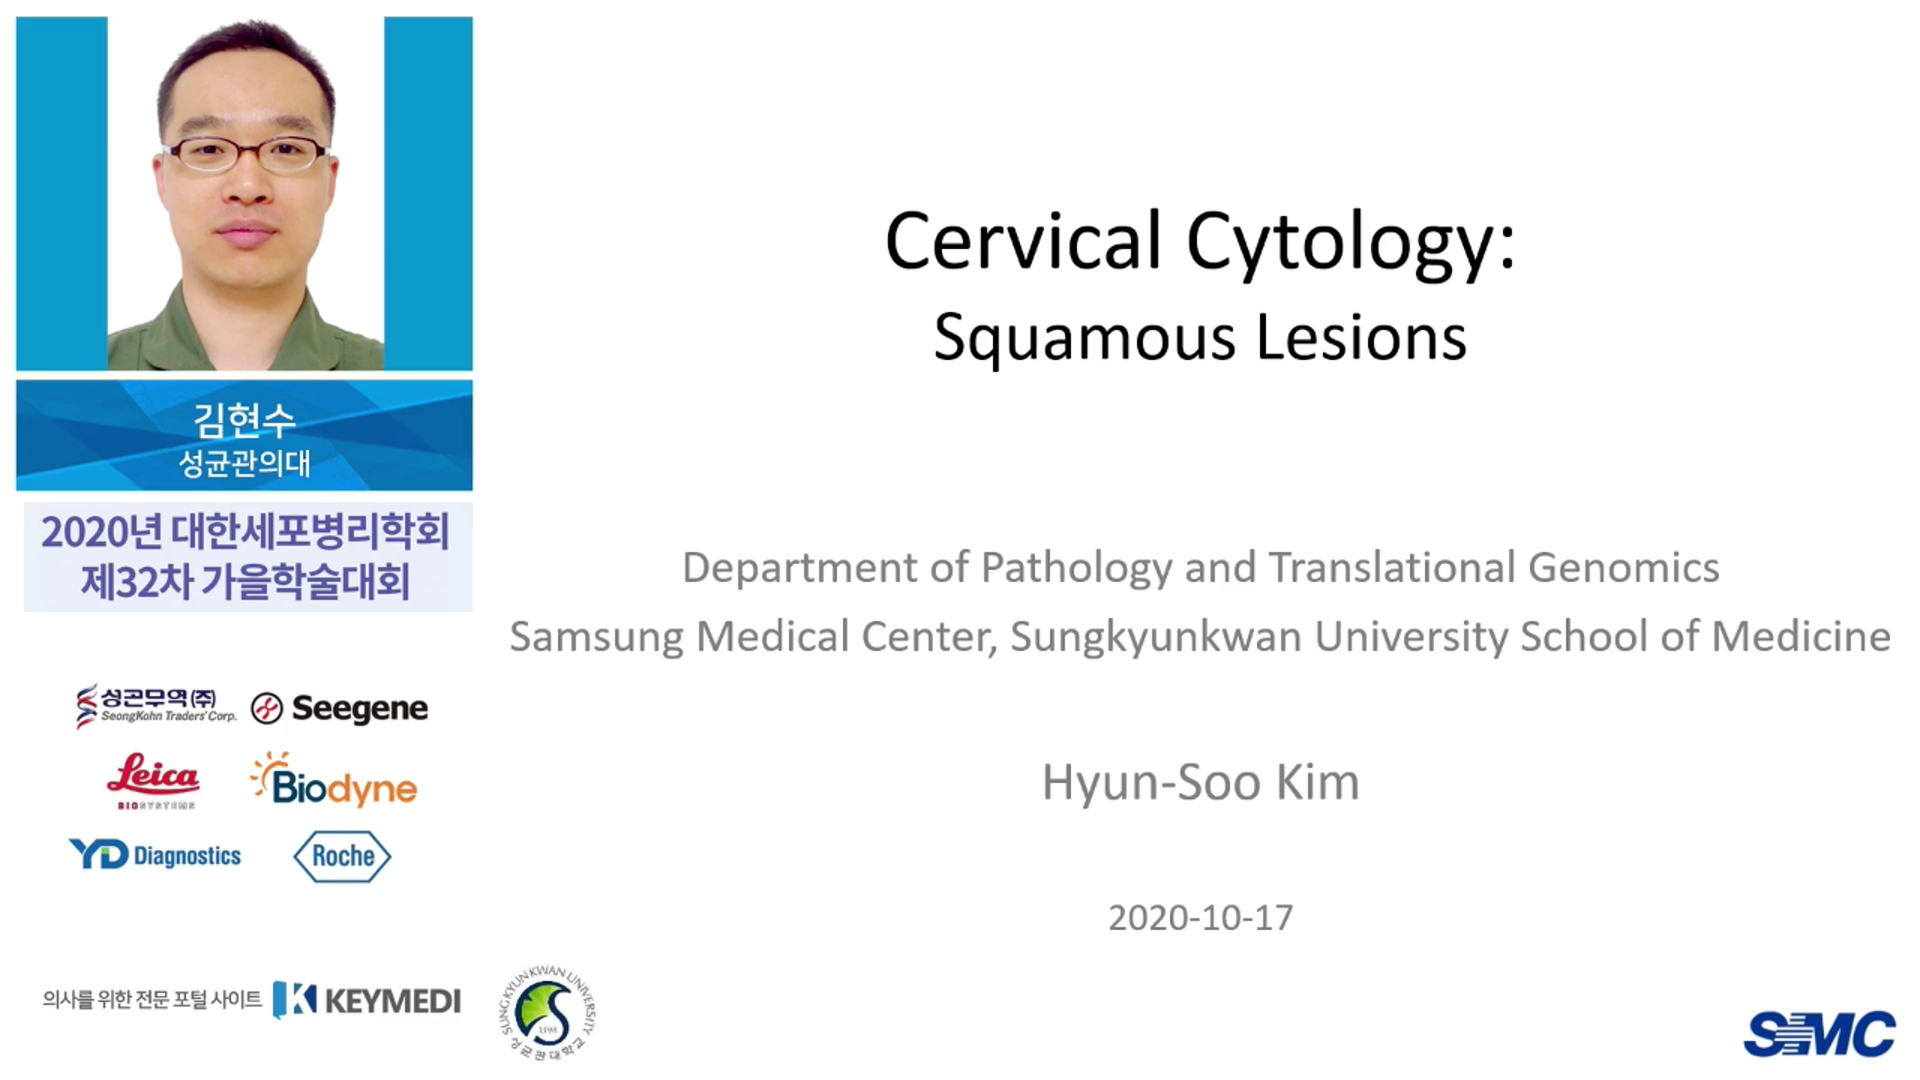 Squamous Lesions in Cervical Cytology